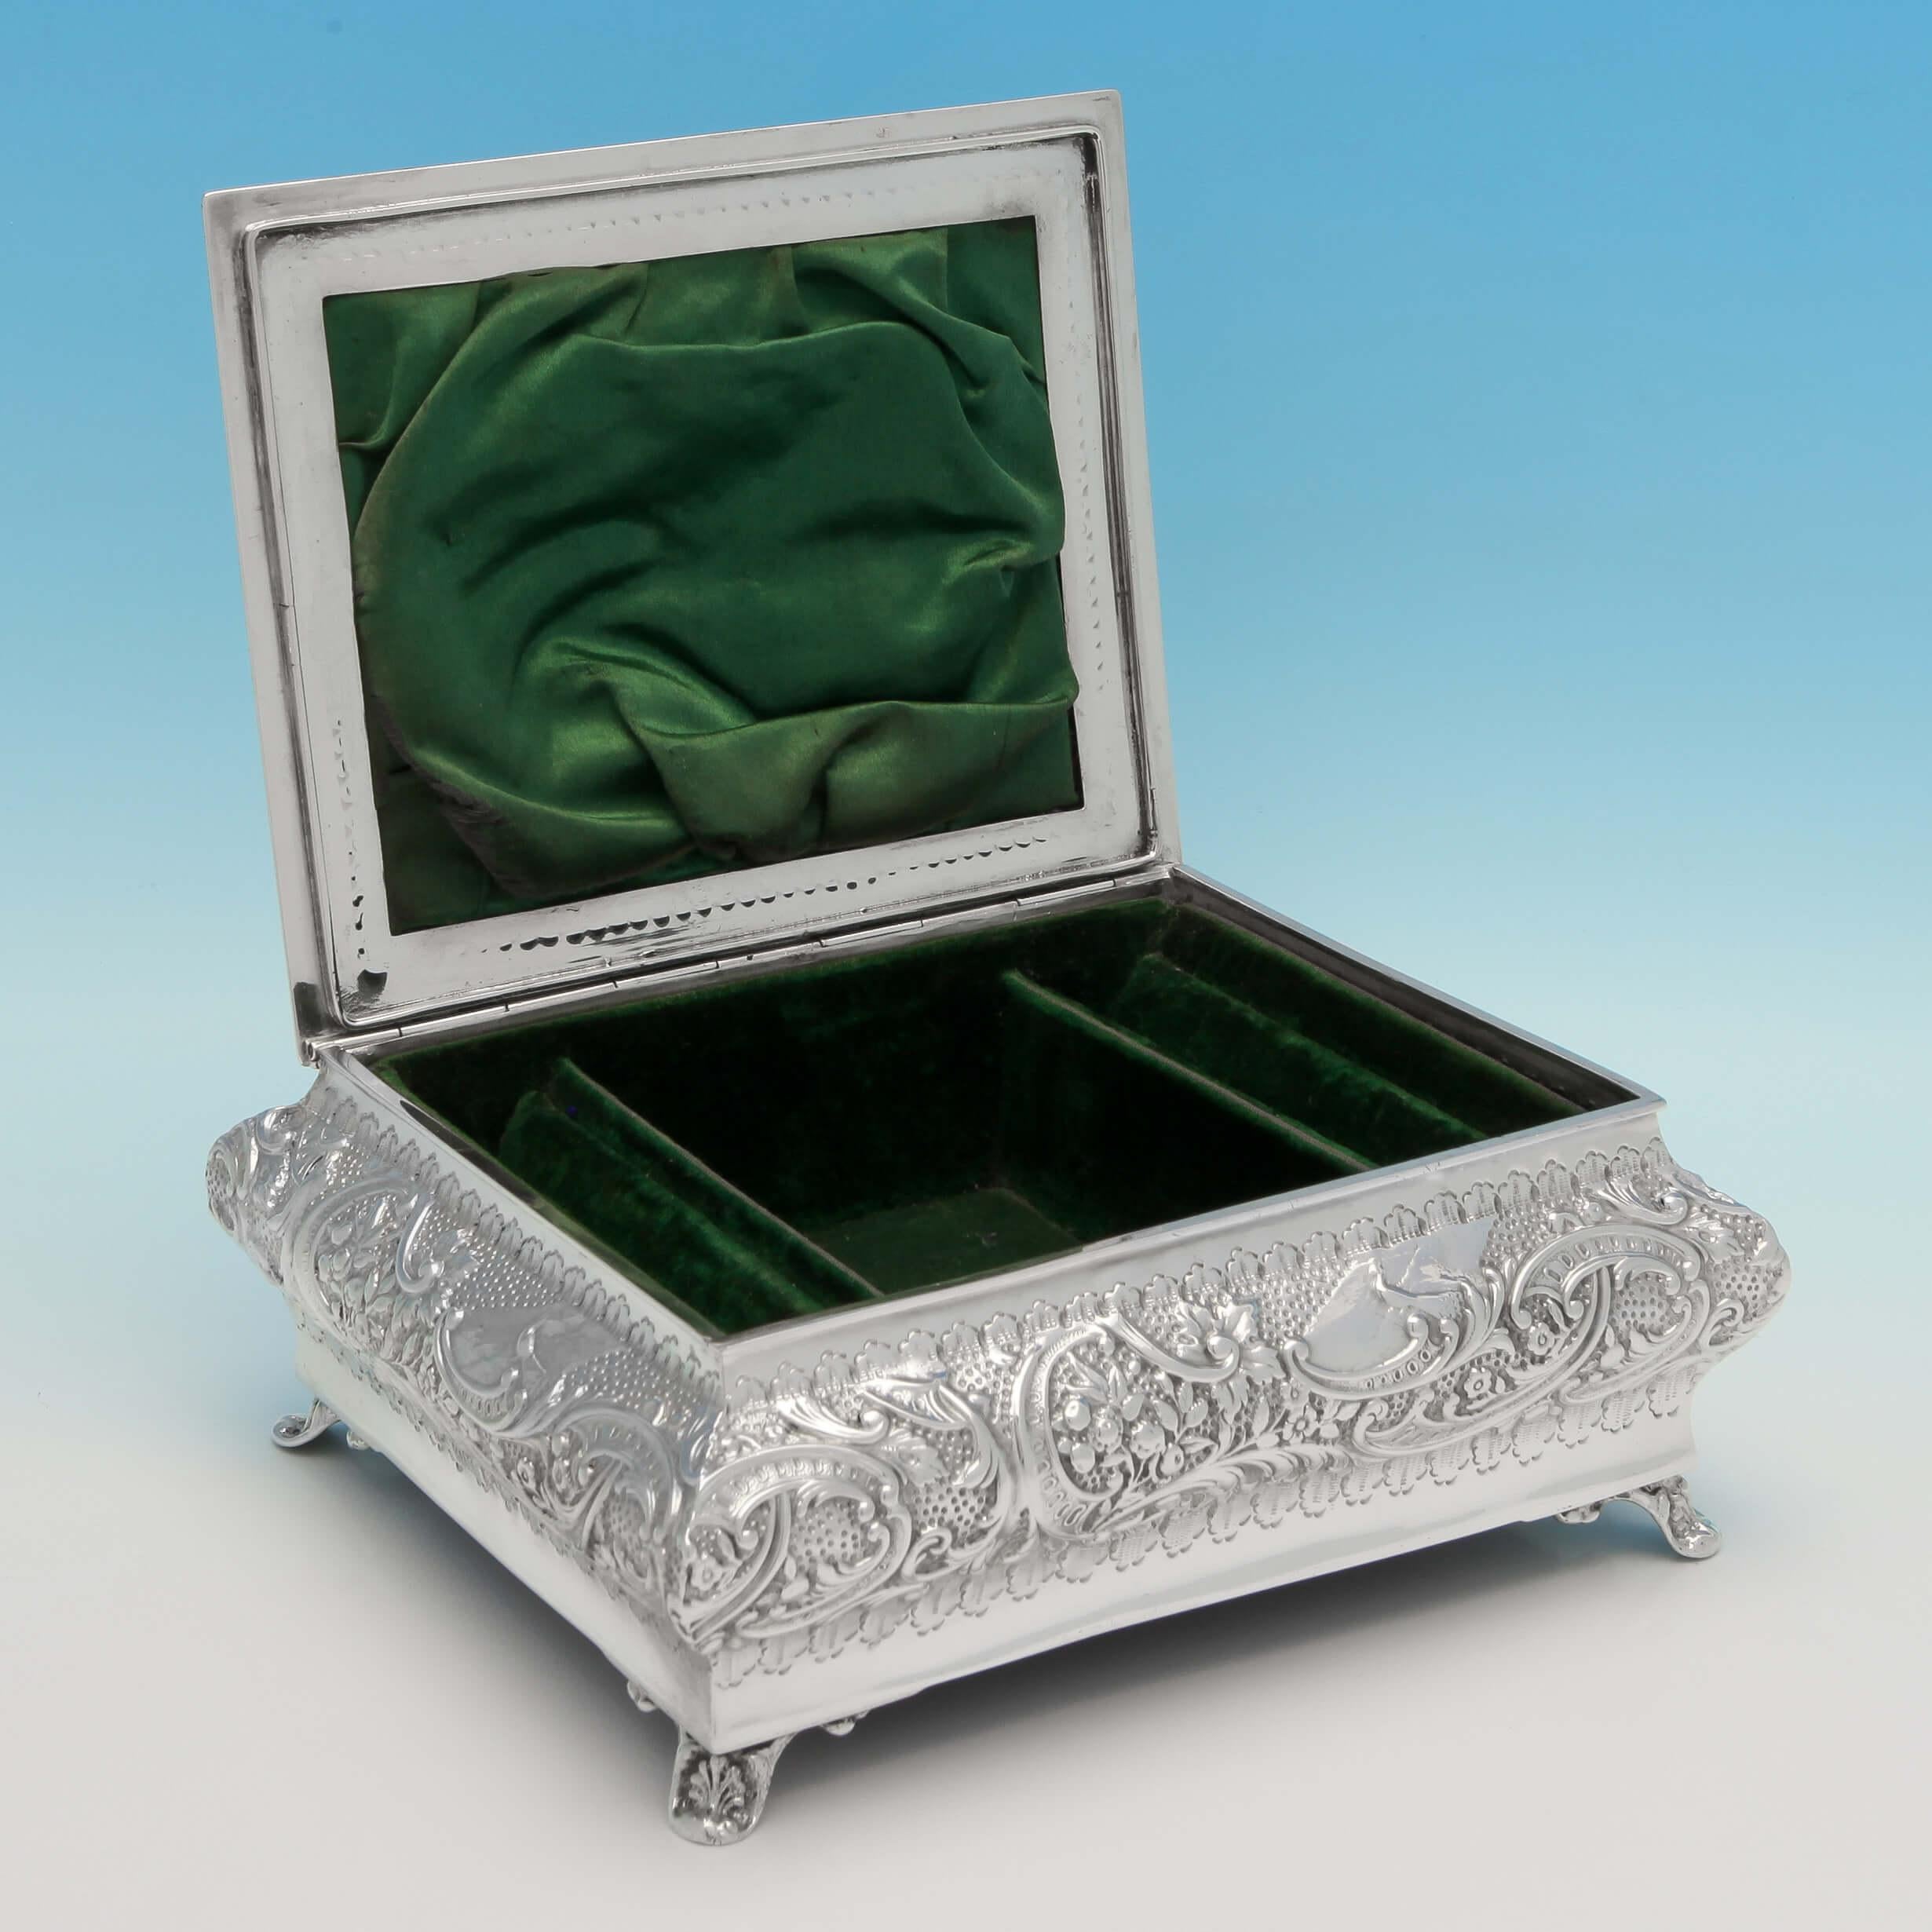 Hallmarked in London in 1902 by Henry Matthews, this fantastic, Edwardian, Antique Sterling Silver Jewellery Box, features a green velvet lined interior with slots for rings, chased decoration throughout, and a scene on the lid depicting two ladies